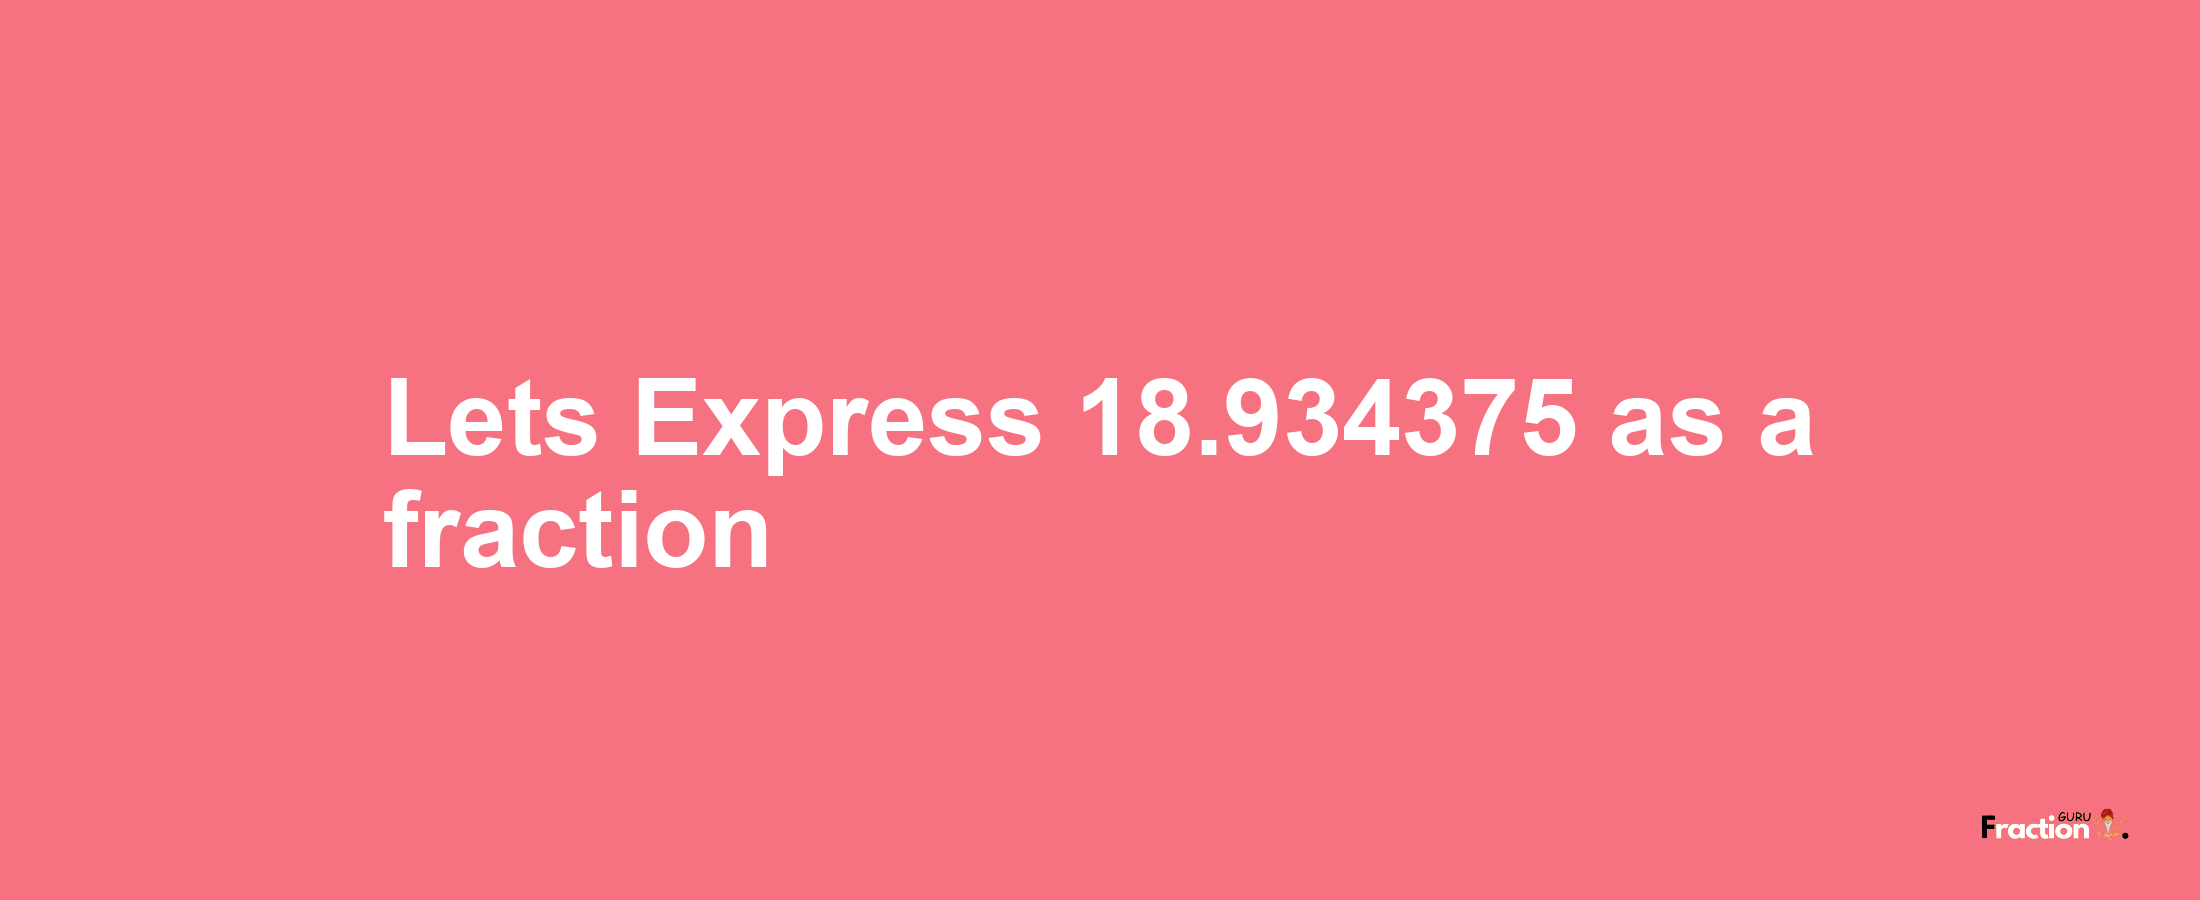 Lets Express 18.934375 as afraction